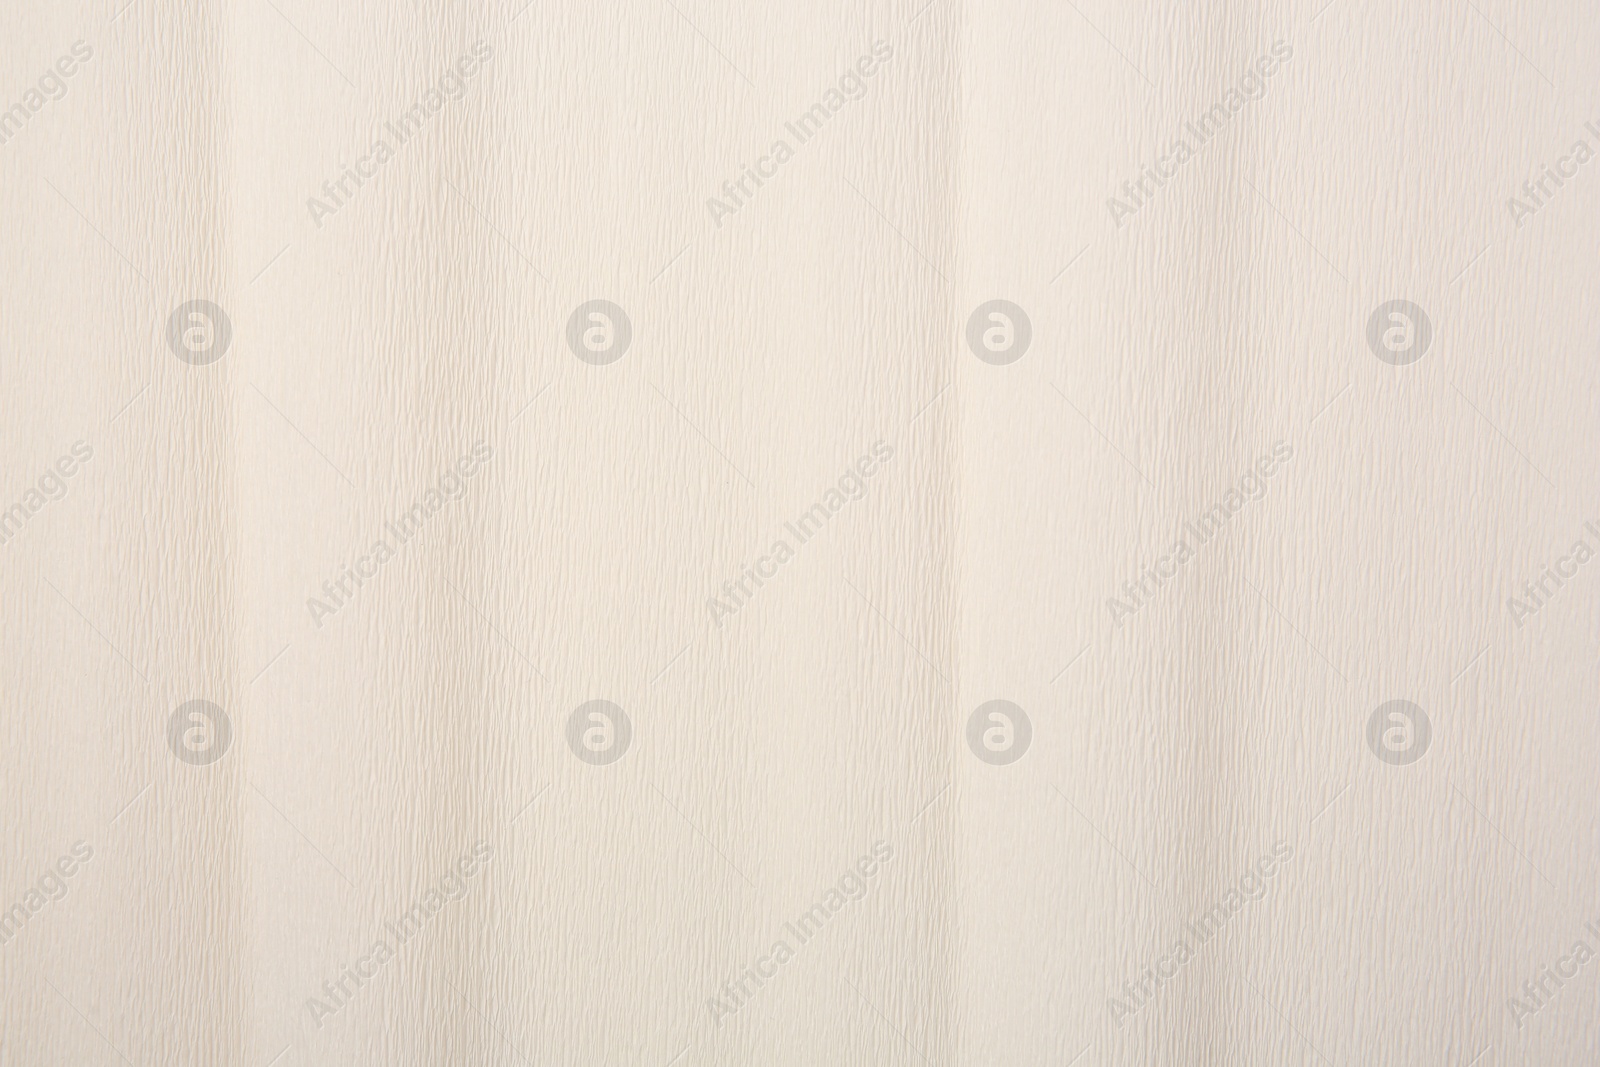 Photo of Texture of beige paper as background, closeup view